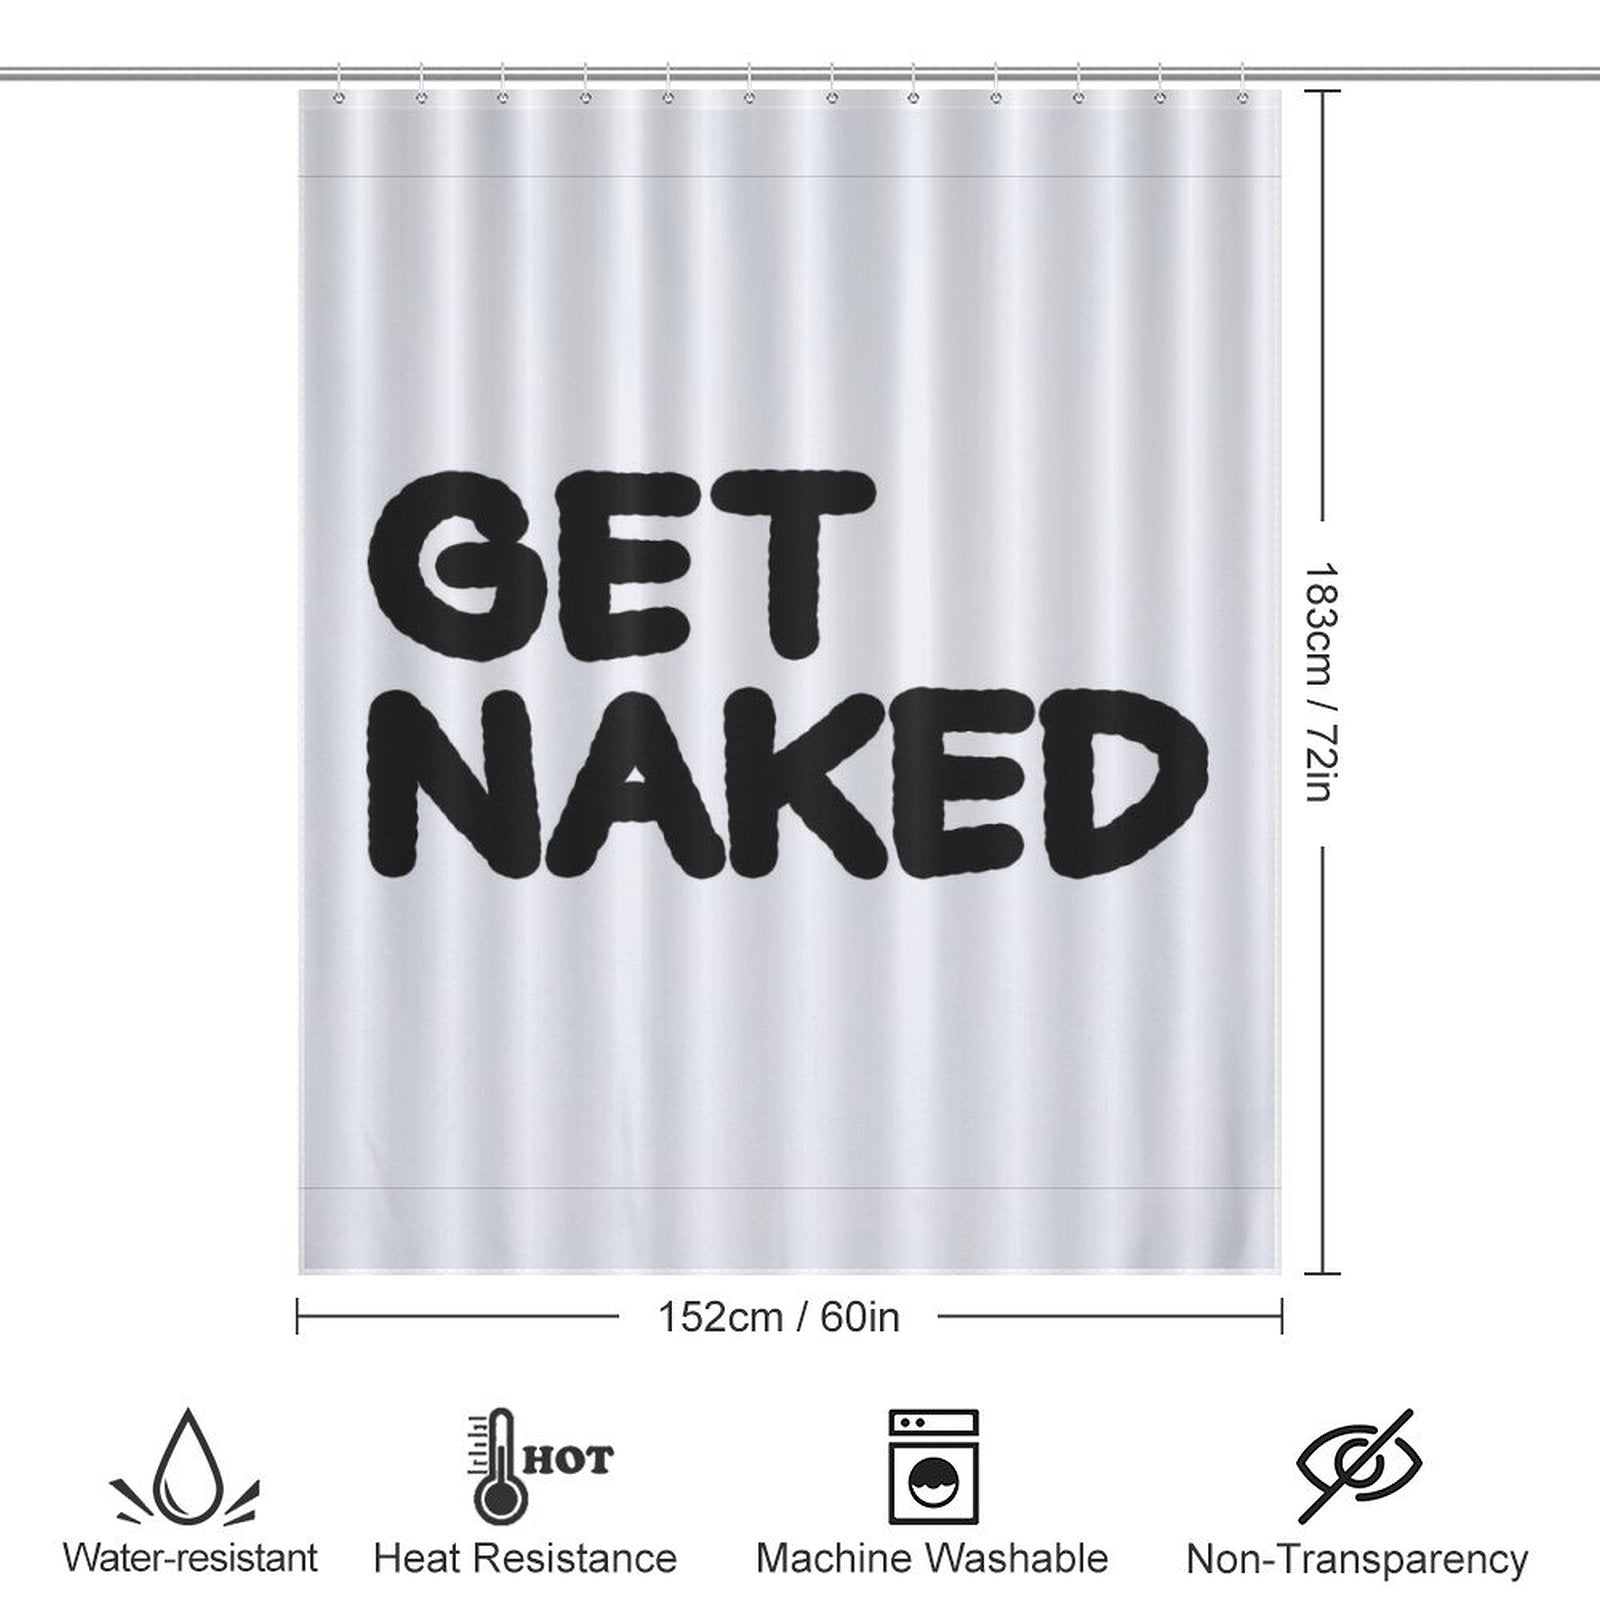 Get the Funny Letters Black and White Get Naked Shower Curtain-Cottoncat with the text "GET NAKED" in bold black letters. Dimensions are 183cm x 152cm. This black and white shower curtain from Cotton Cat features icons for water-resistance, heat resistance, machine washable, and non-transparency.